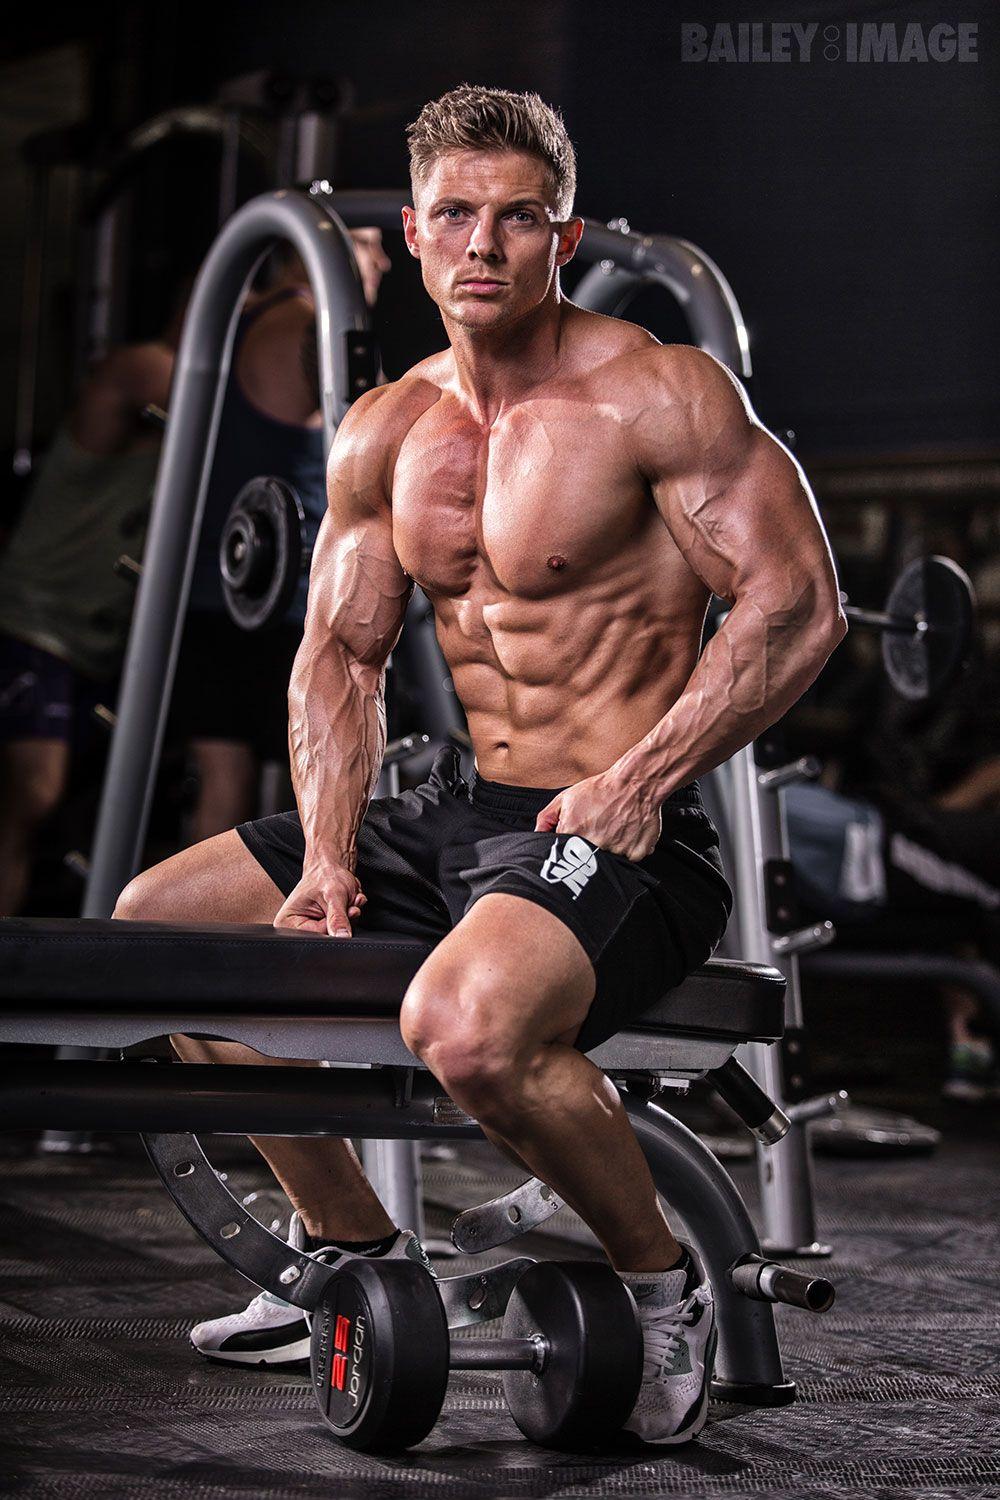 Pumping Iron: Ryan Terry on life as a professional bodybuilder HD wallpaper  | Pxfuel